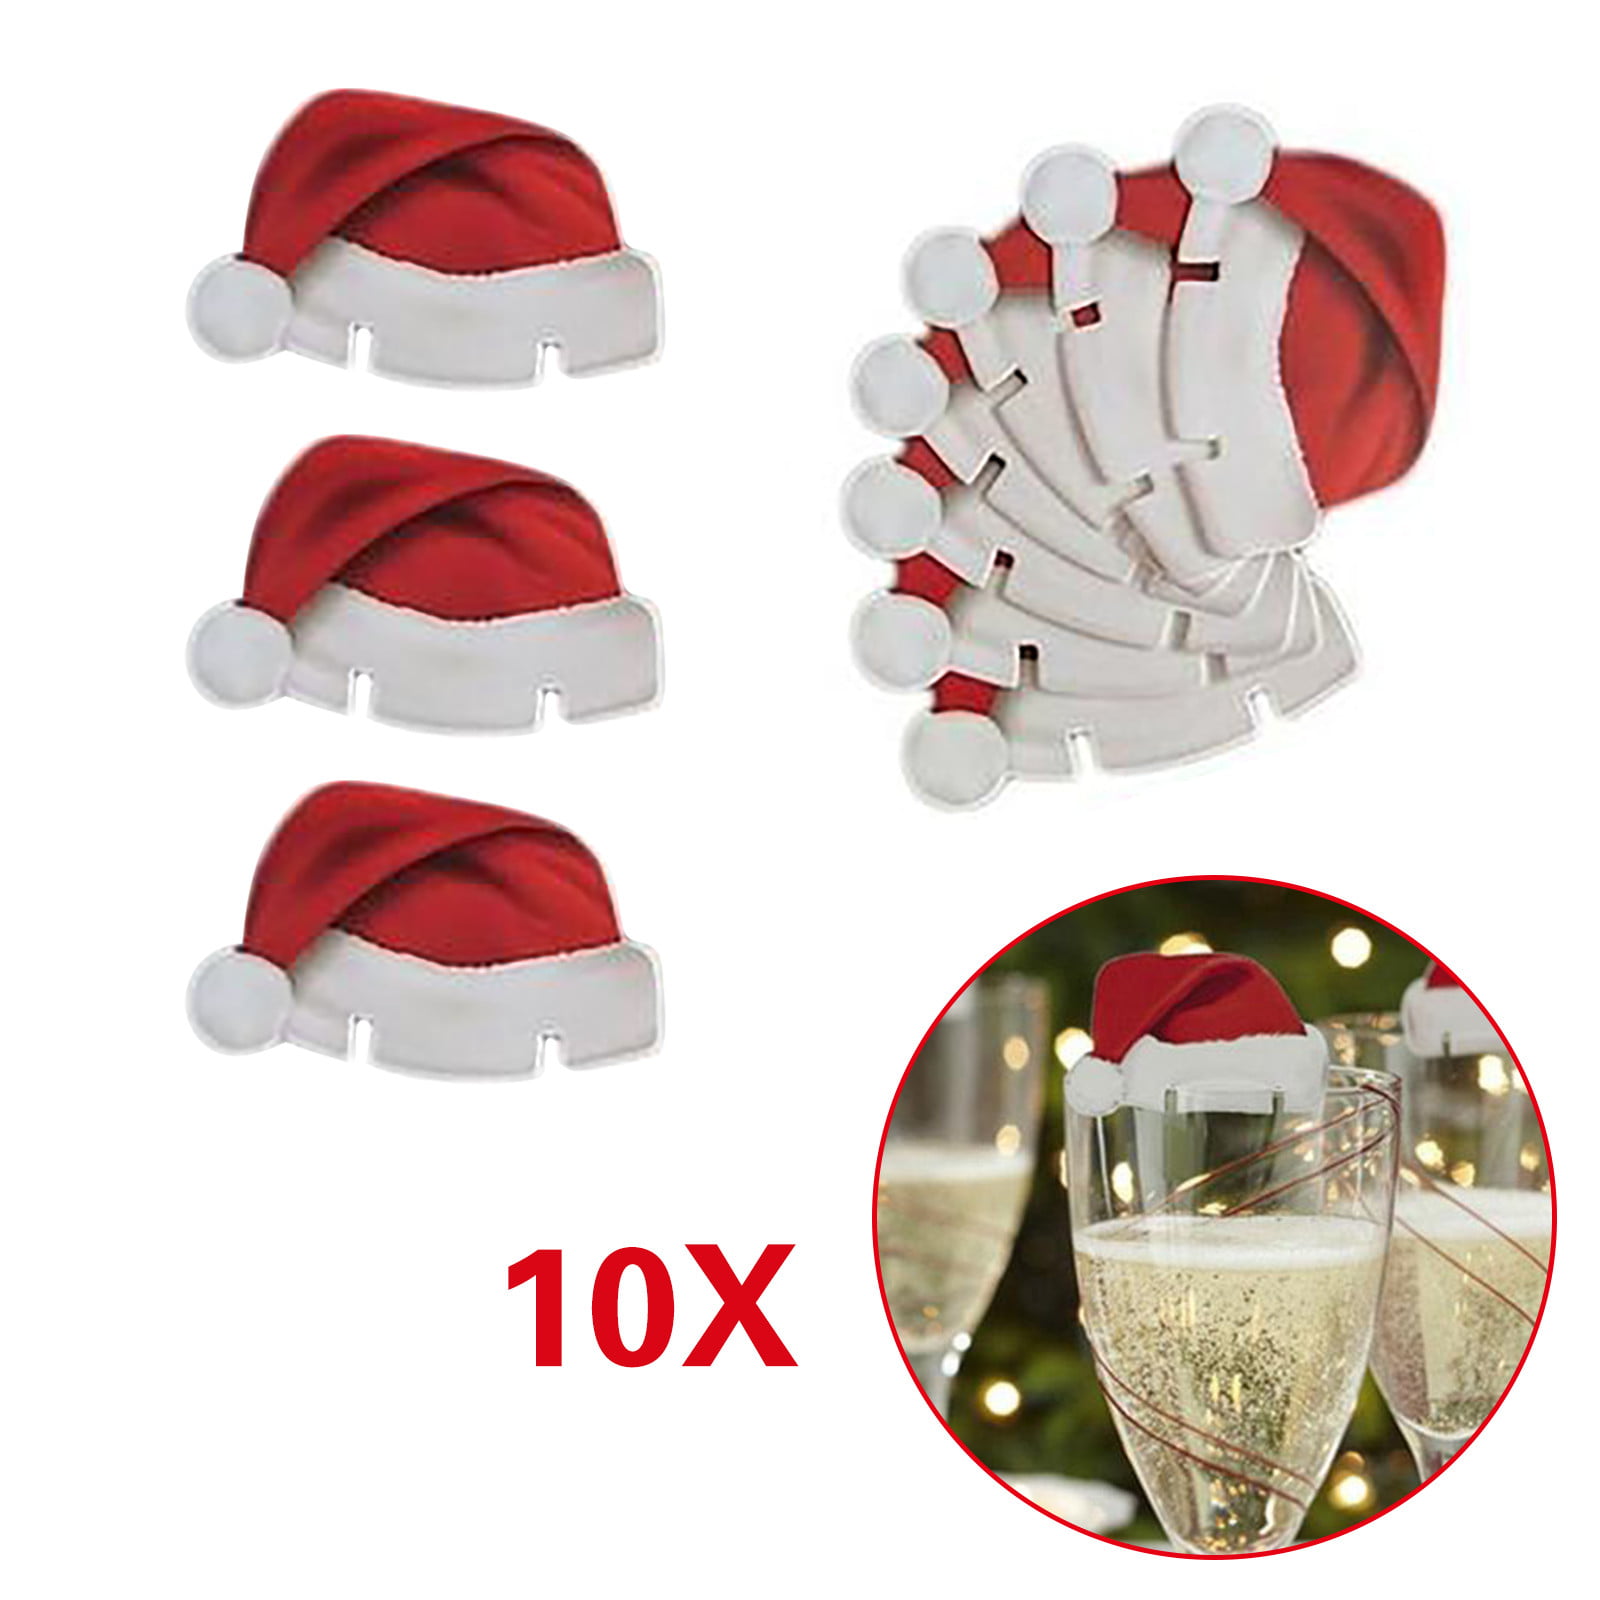 5pcs Xmas Hats Champagne Wine Glass Caps Christmas Holiday Party Decorations BTC 